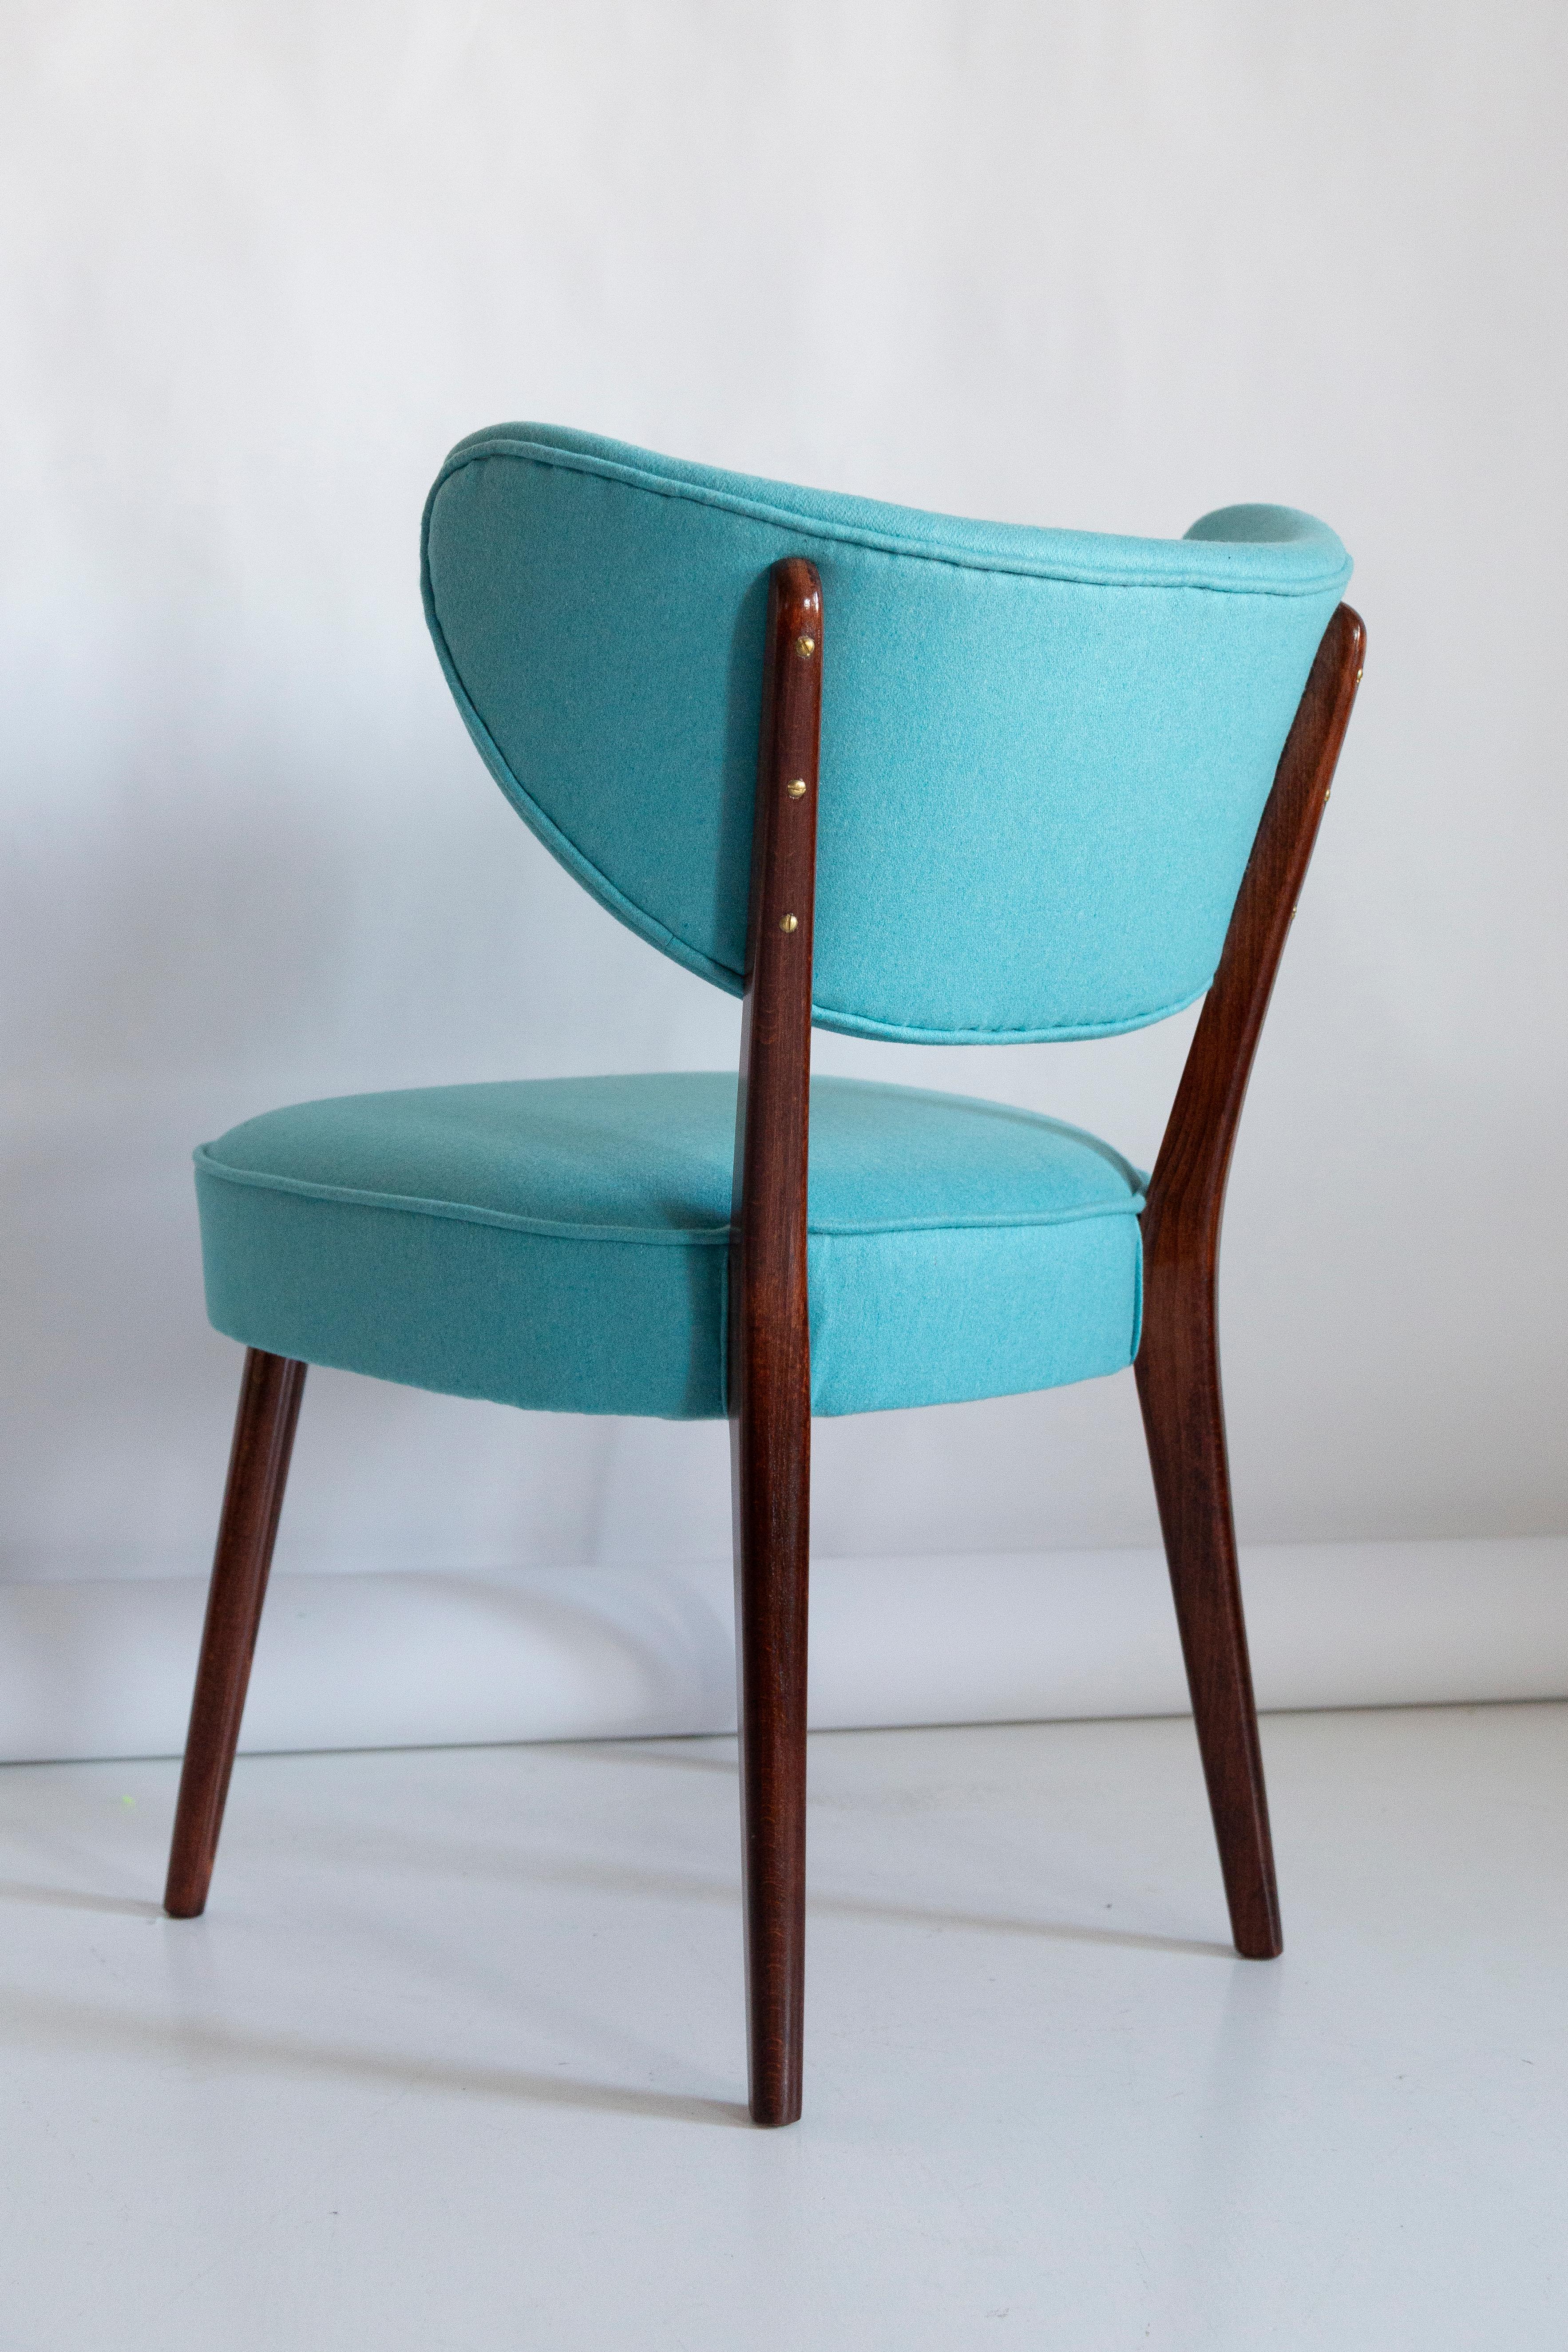 Contemporary Set of Ten Shell Dining Chairs, Turquoise Wool, by Vintola Studio, Europe. For Sale